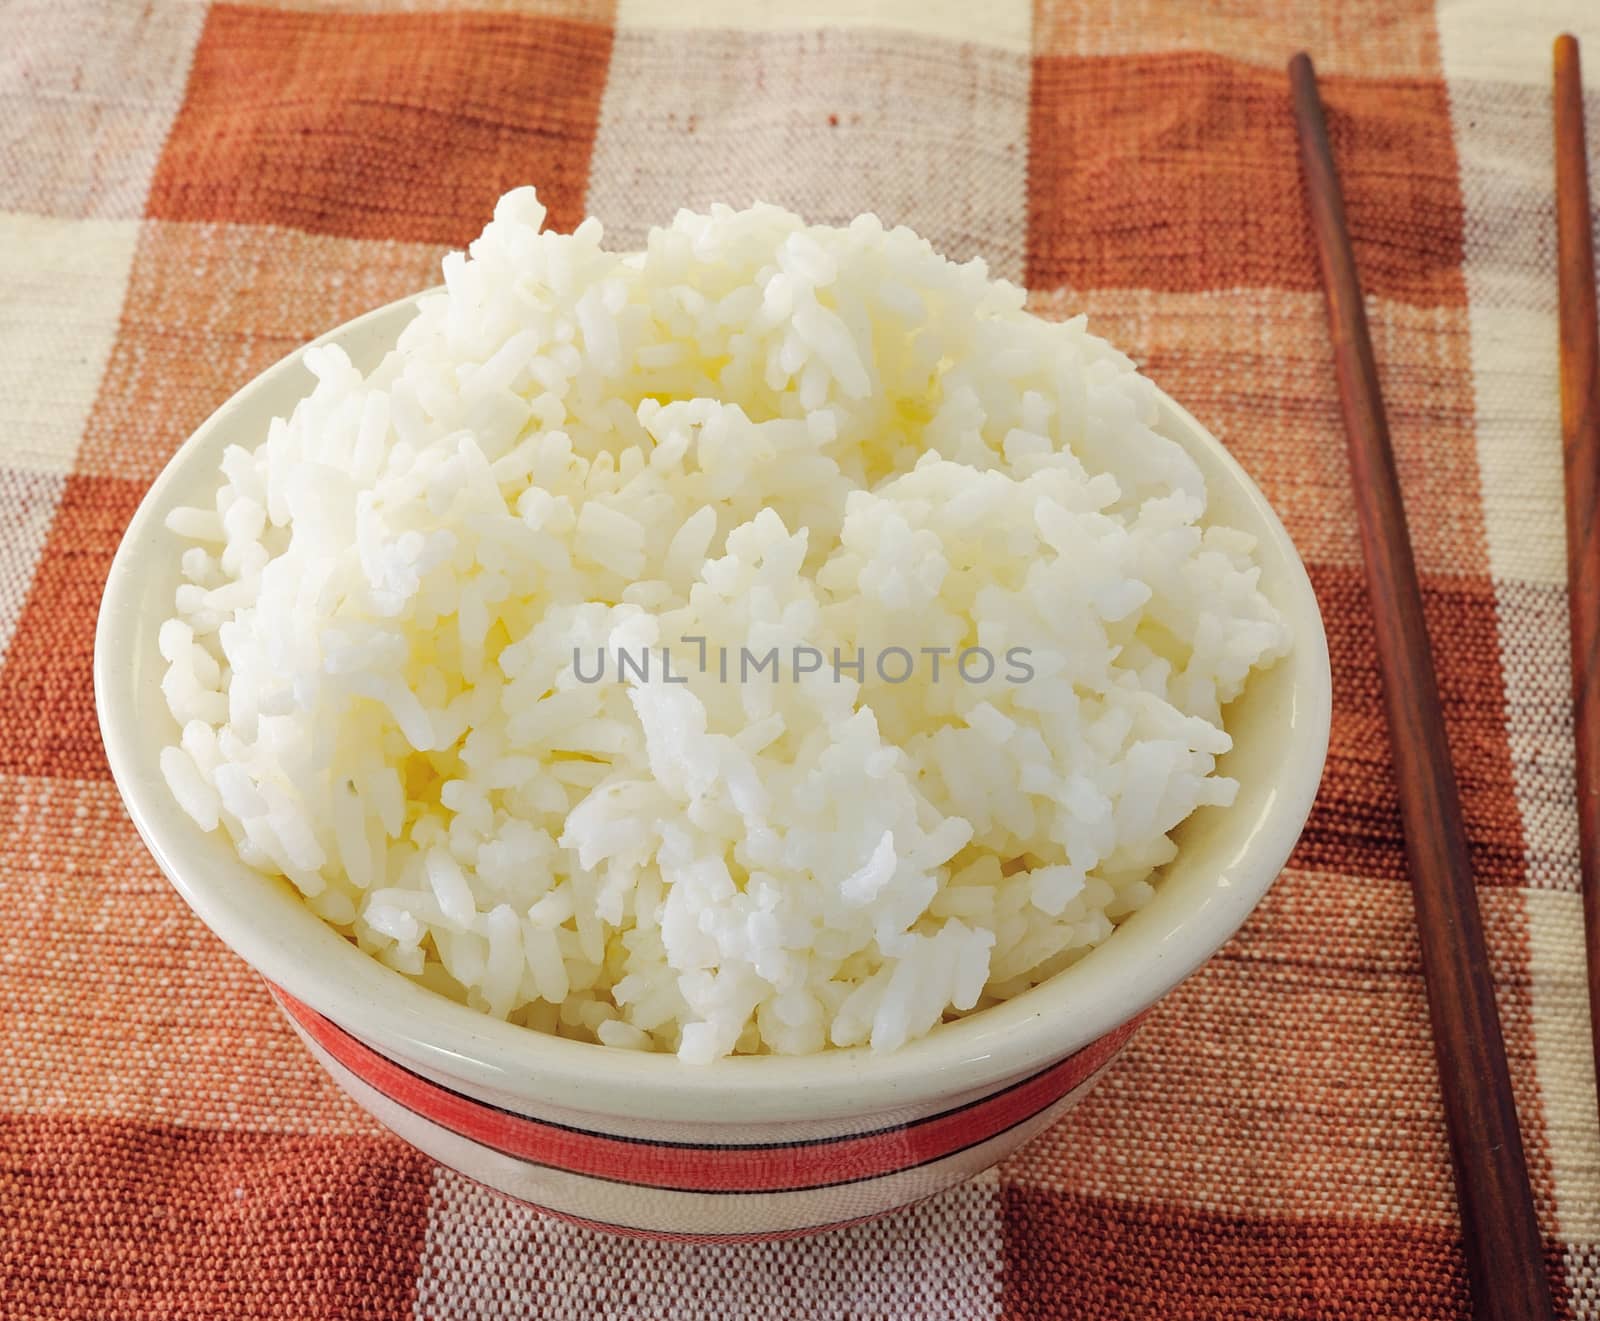 Rice in a bowl on a white background by sommai